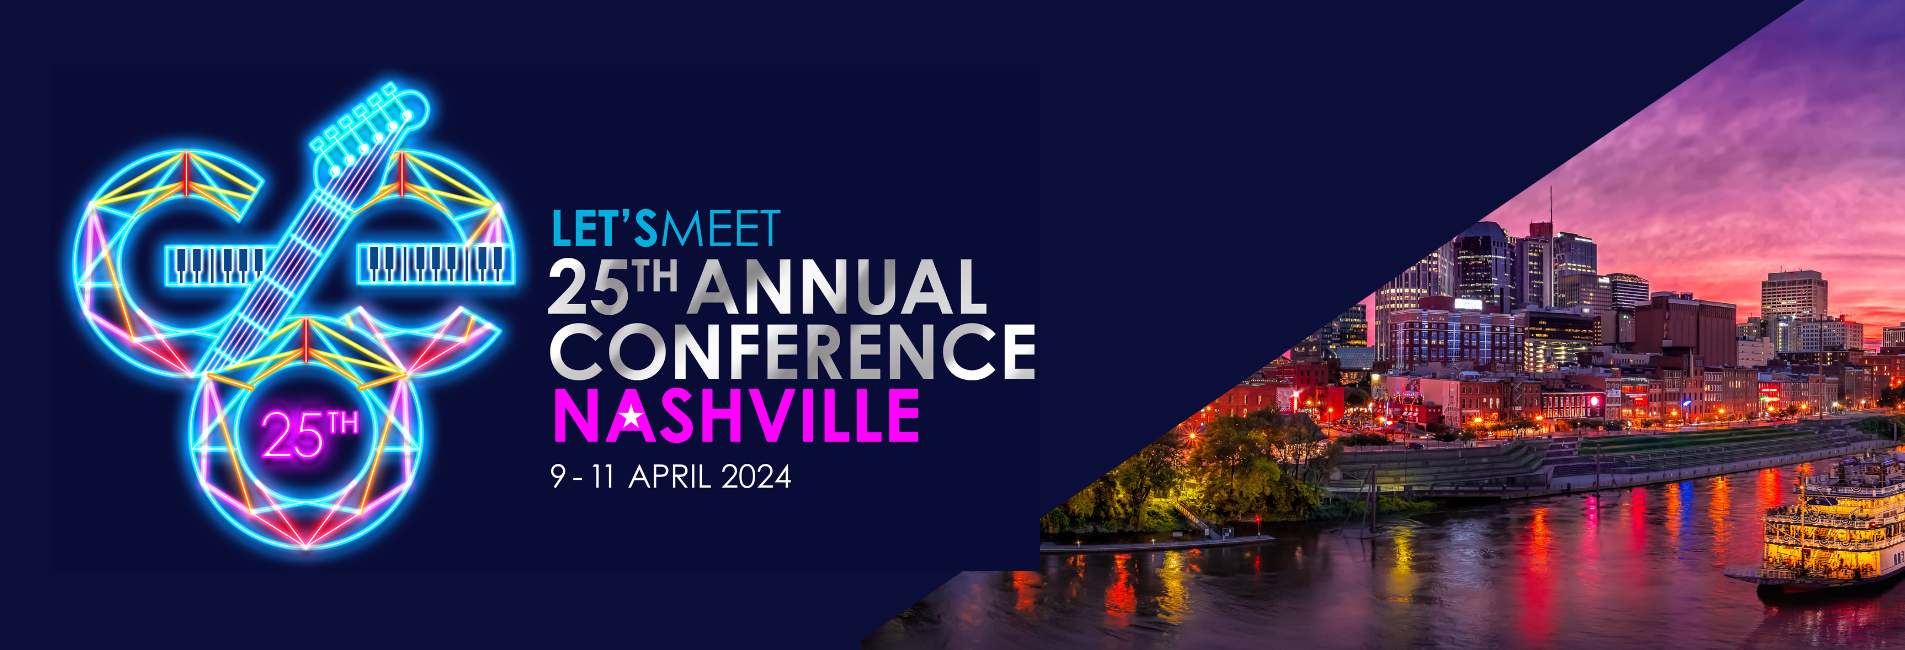 25th Annual Conference Nashville Global Equity Organization